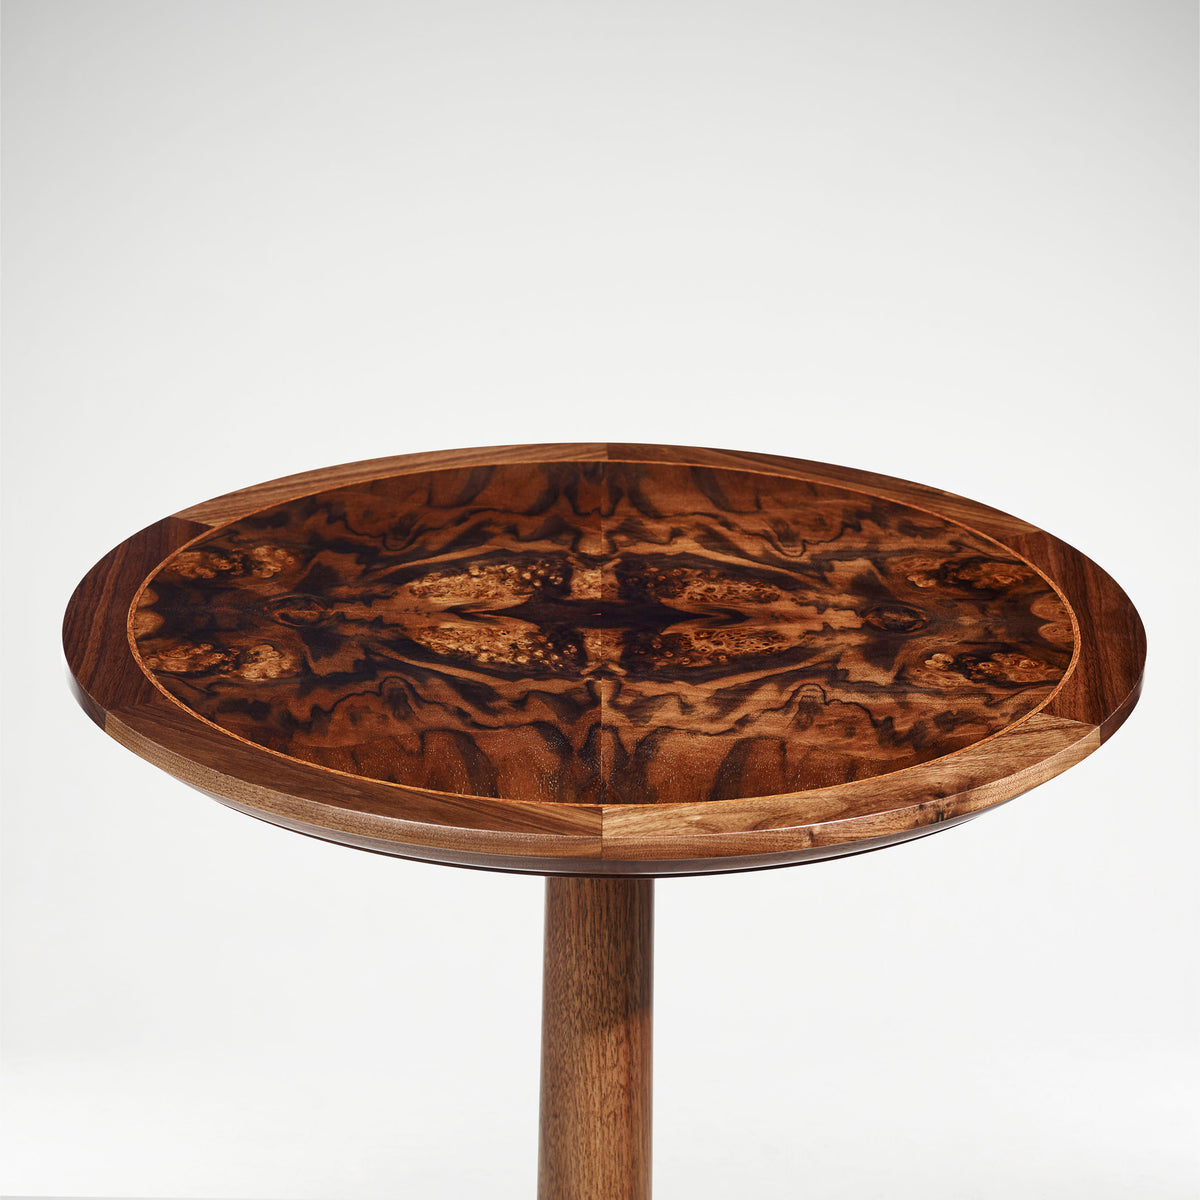 LINLEY Classic Circular Side Table | Bespoke Design & Luxury Furniture | LINLEY